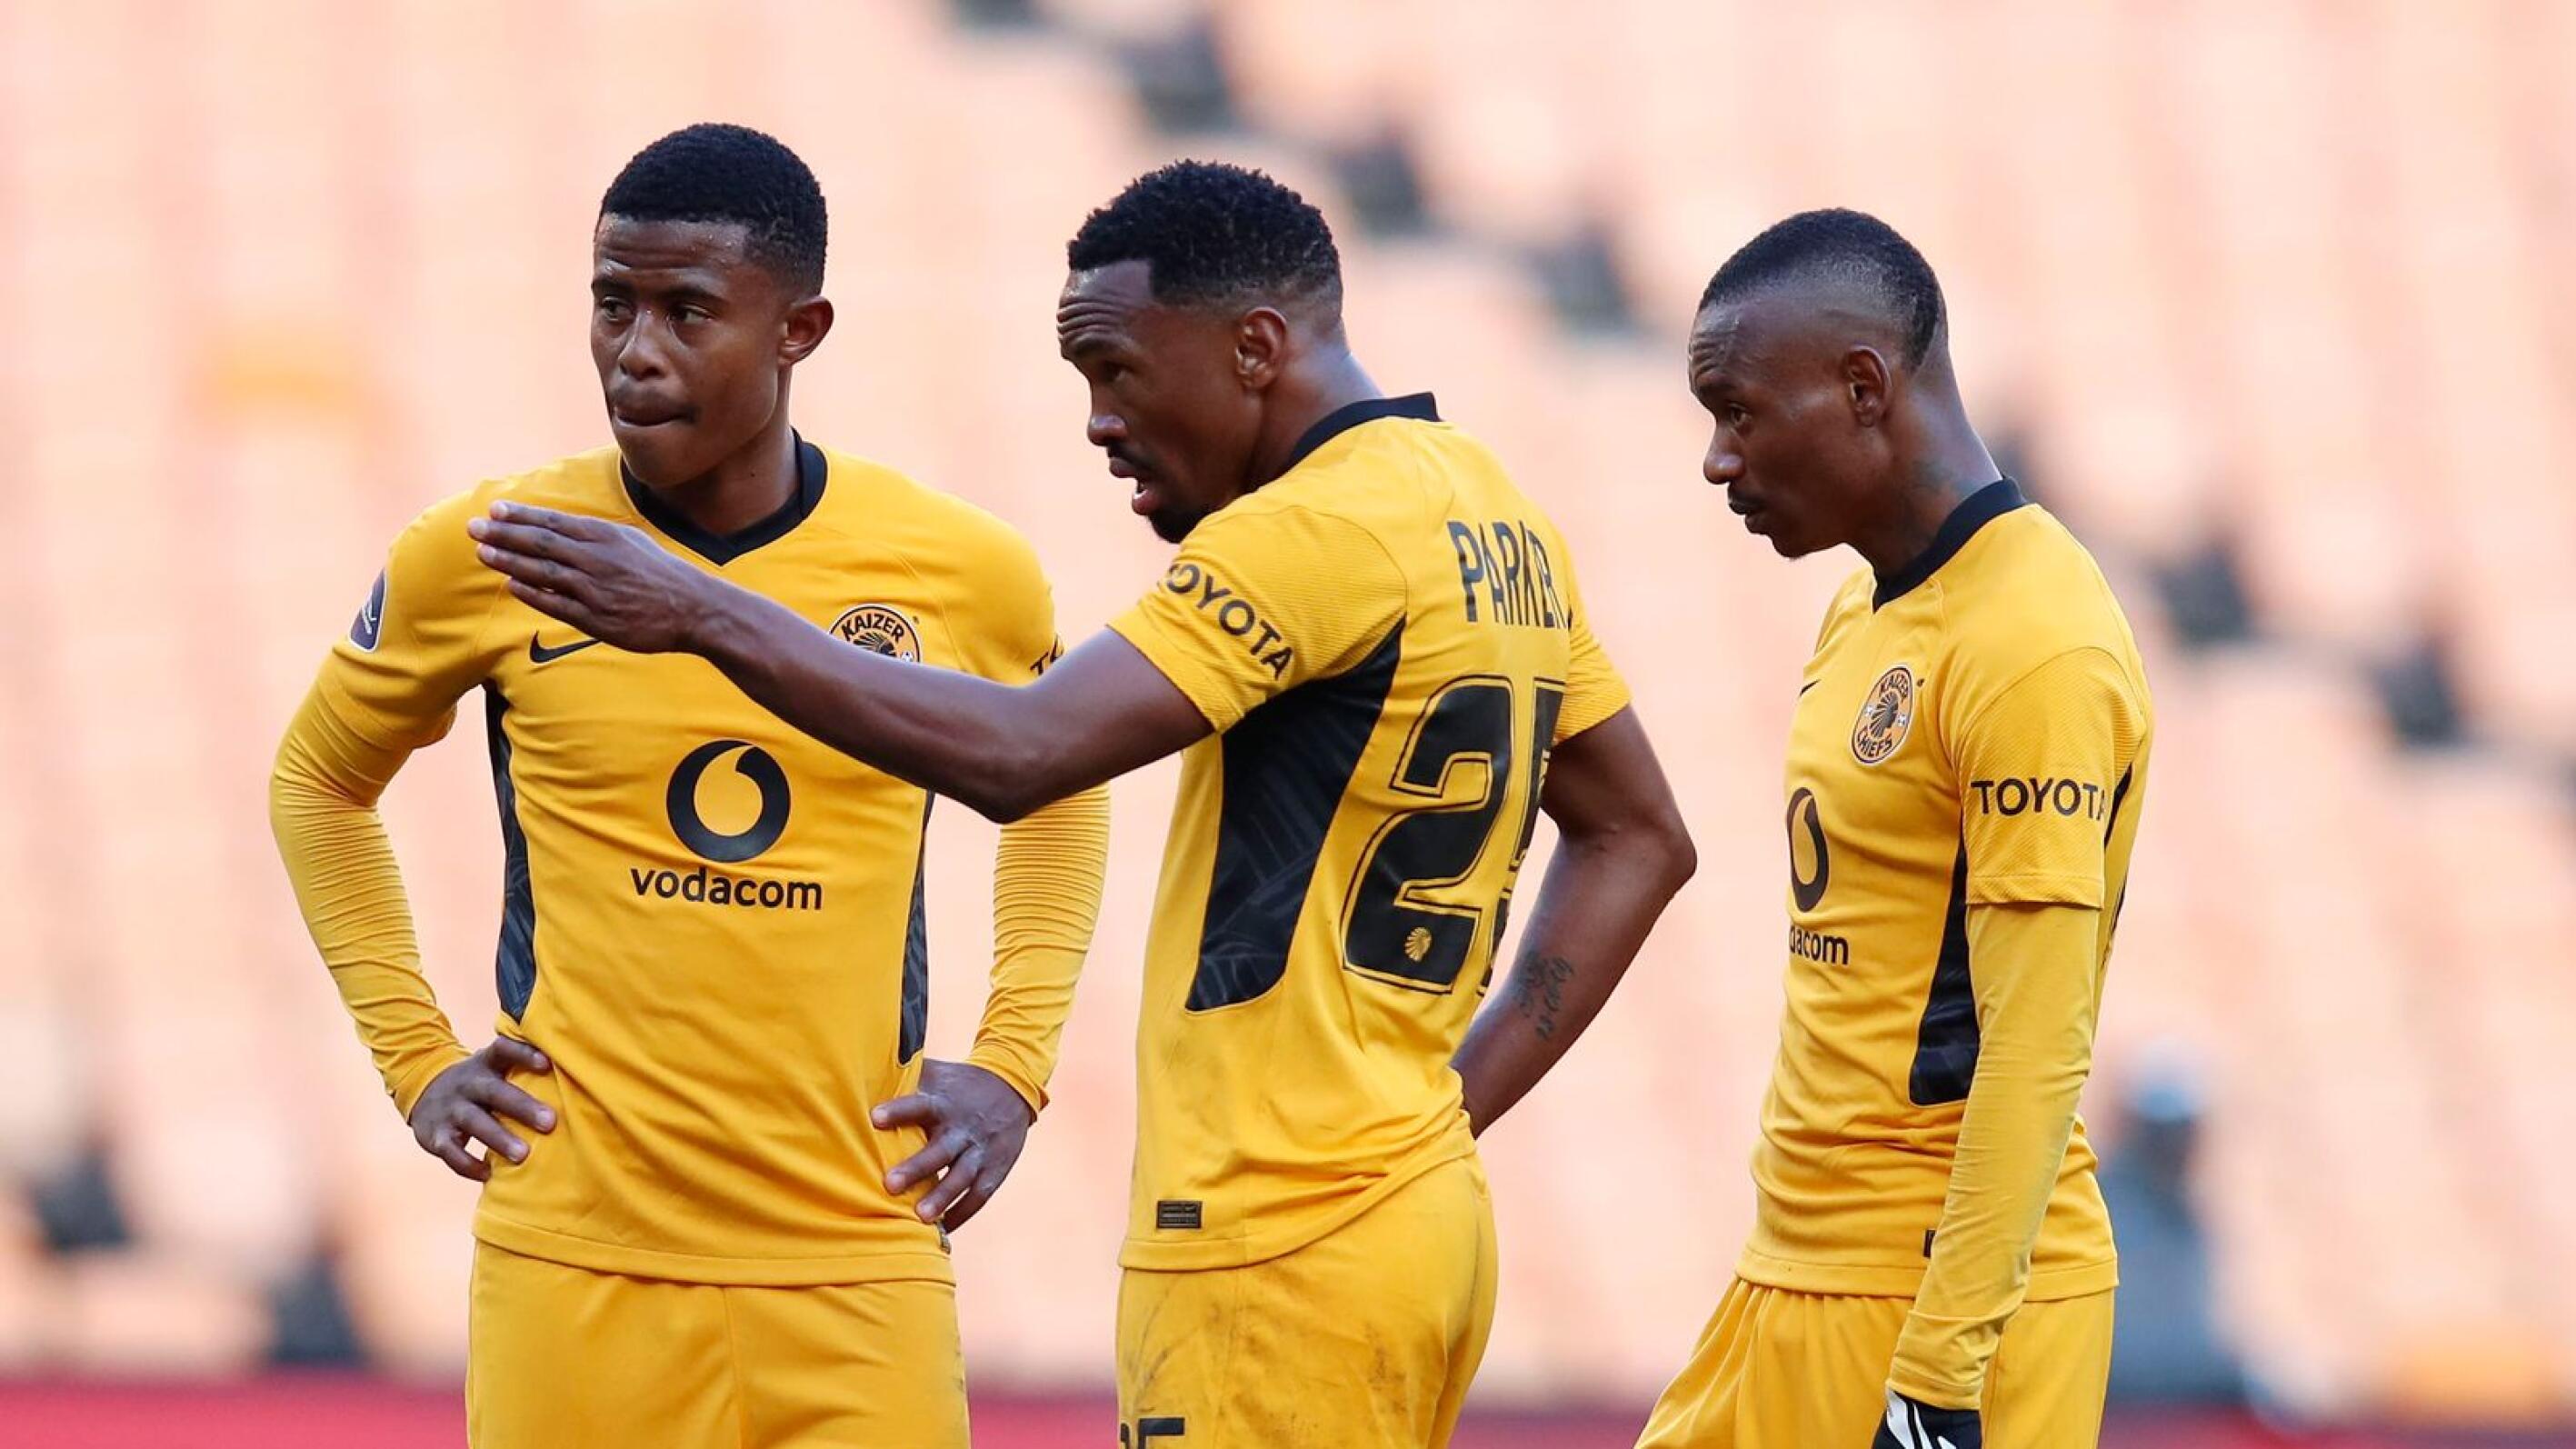 Kaizer Chiefs’ Bernard Parker, Happy Mashiane, and Khama Billiat in action during their DStv Premiership match against Swallows FC at the FNB Stadium in Soweto, Johannesburg on Saturday